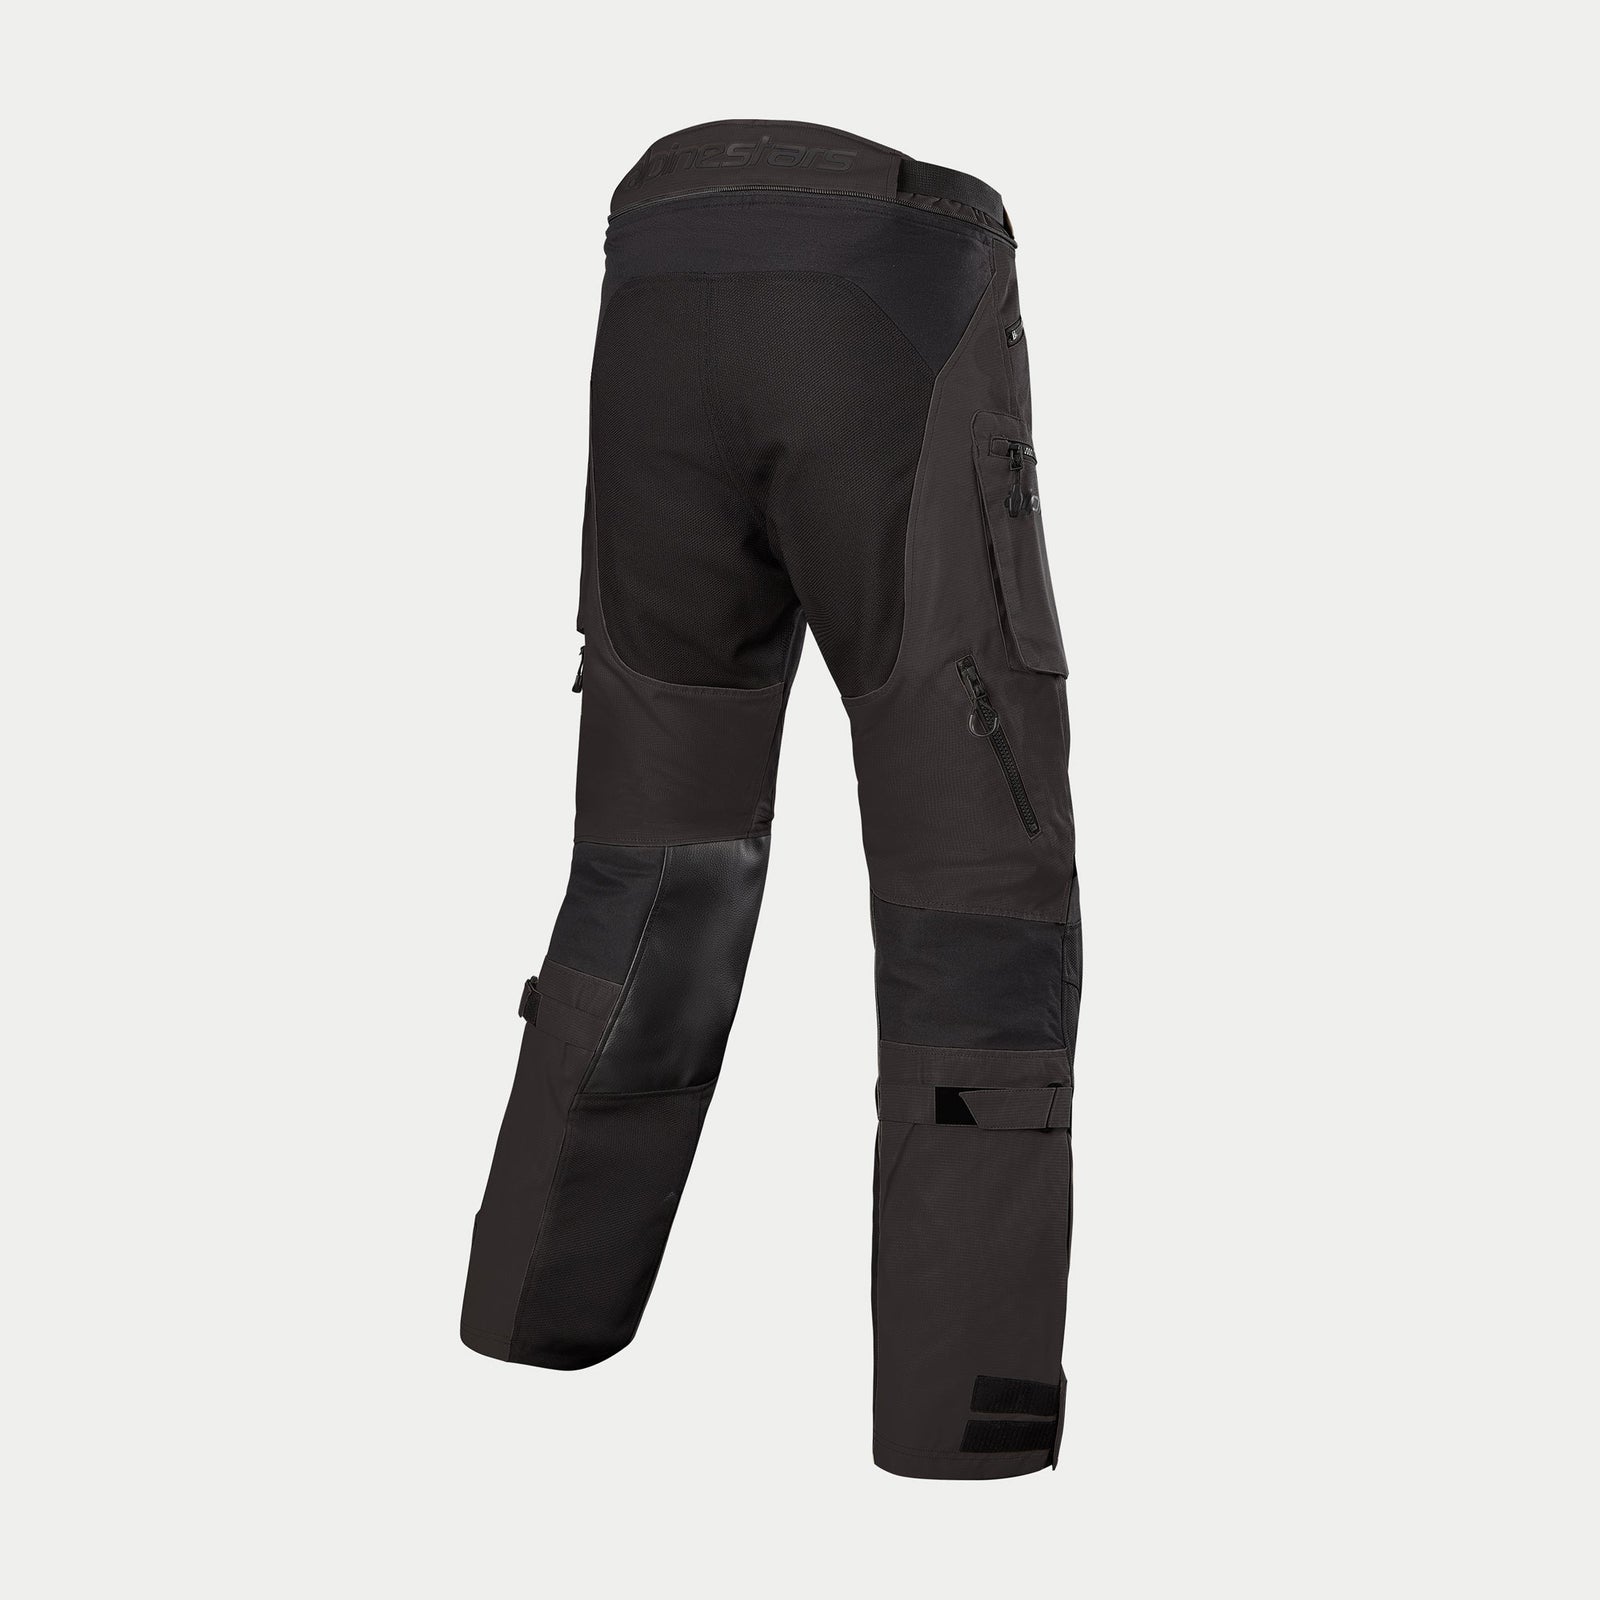 Ardent 3In1 Adventure Touring Pants